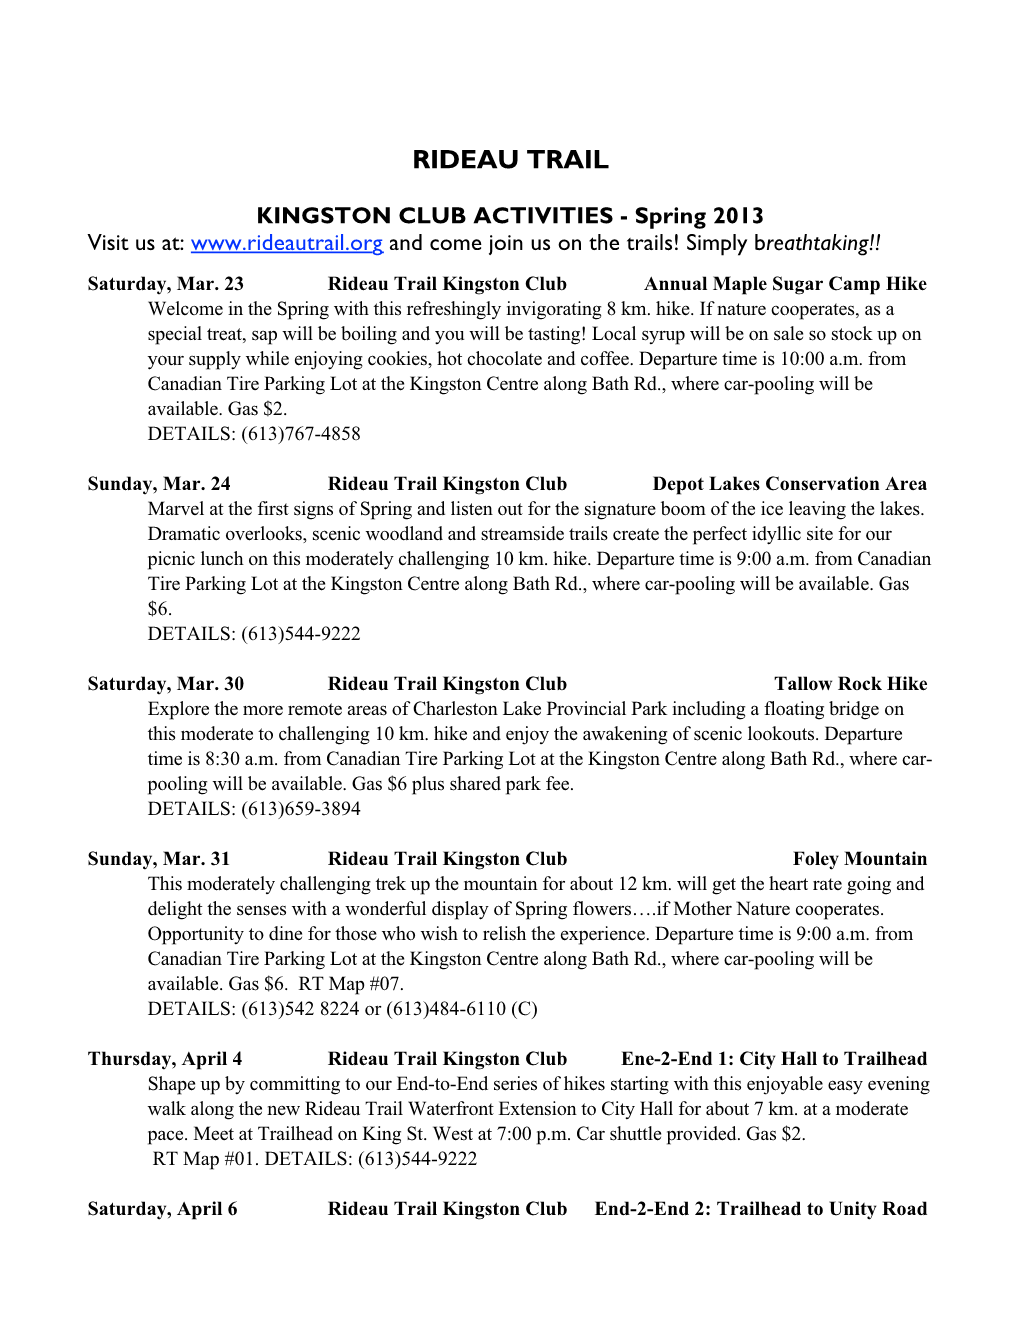 Spring 2013 Hikes for Distribtuion by E-Mail